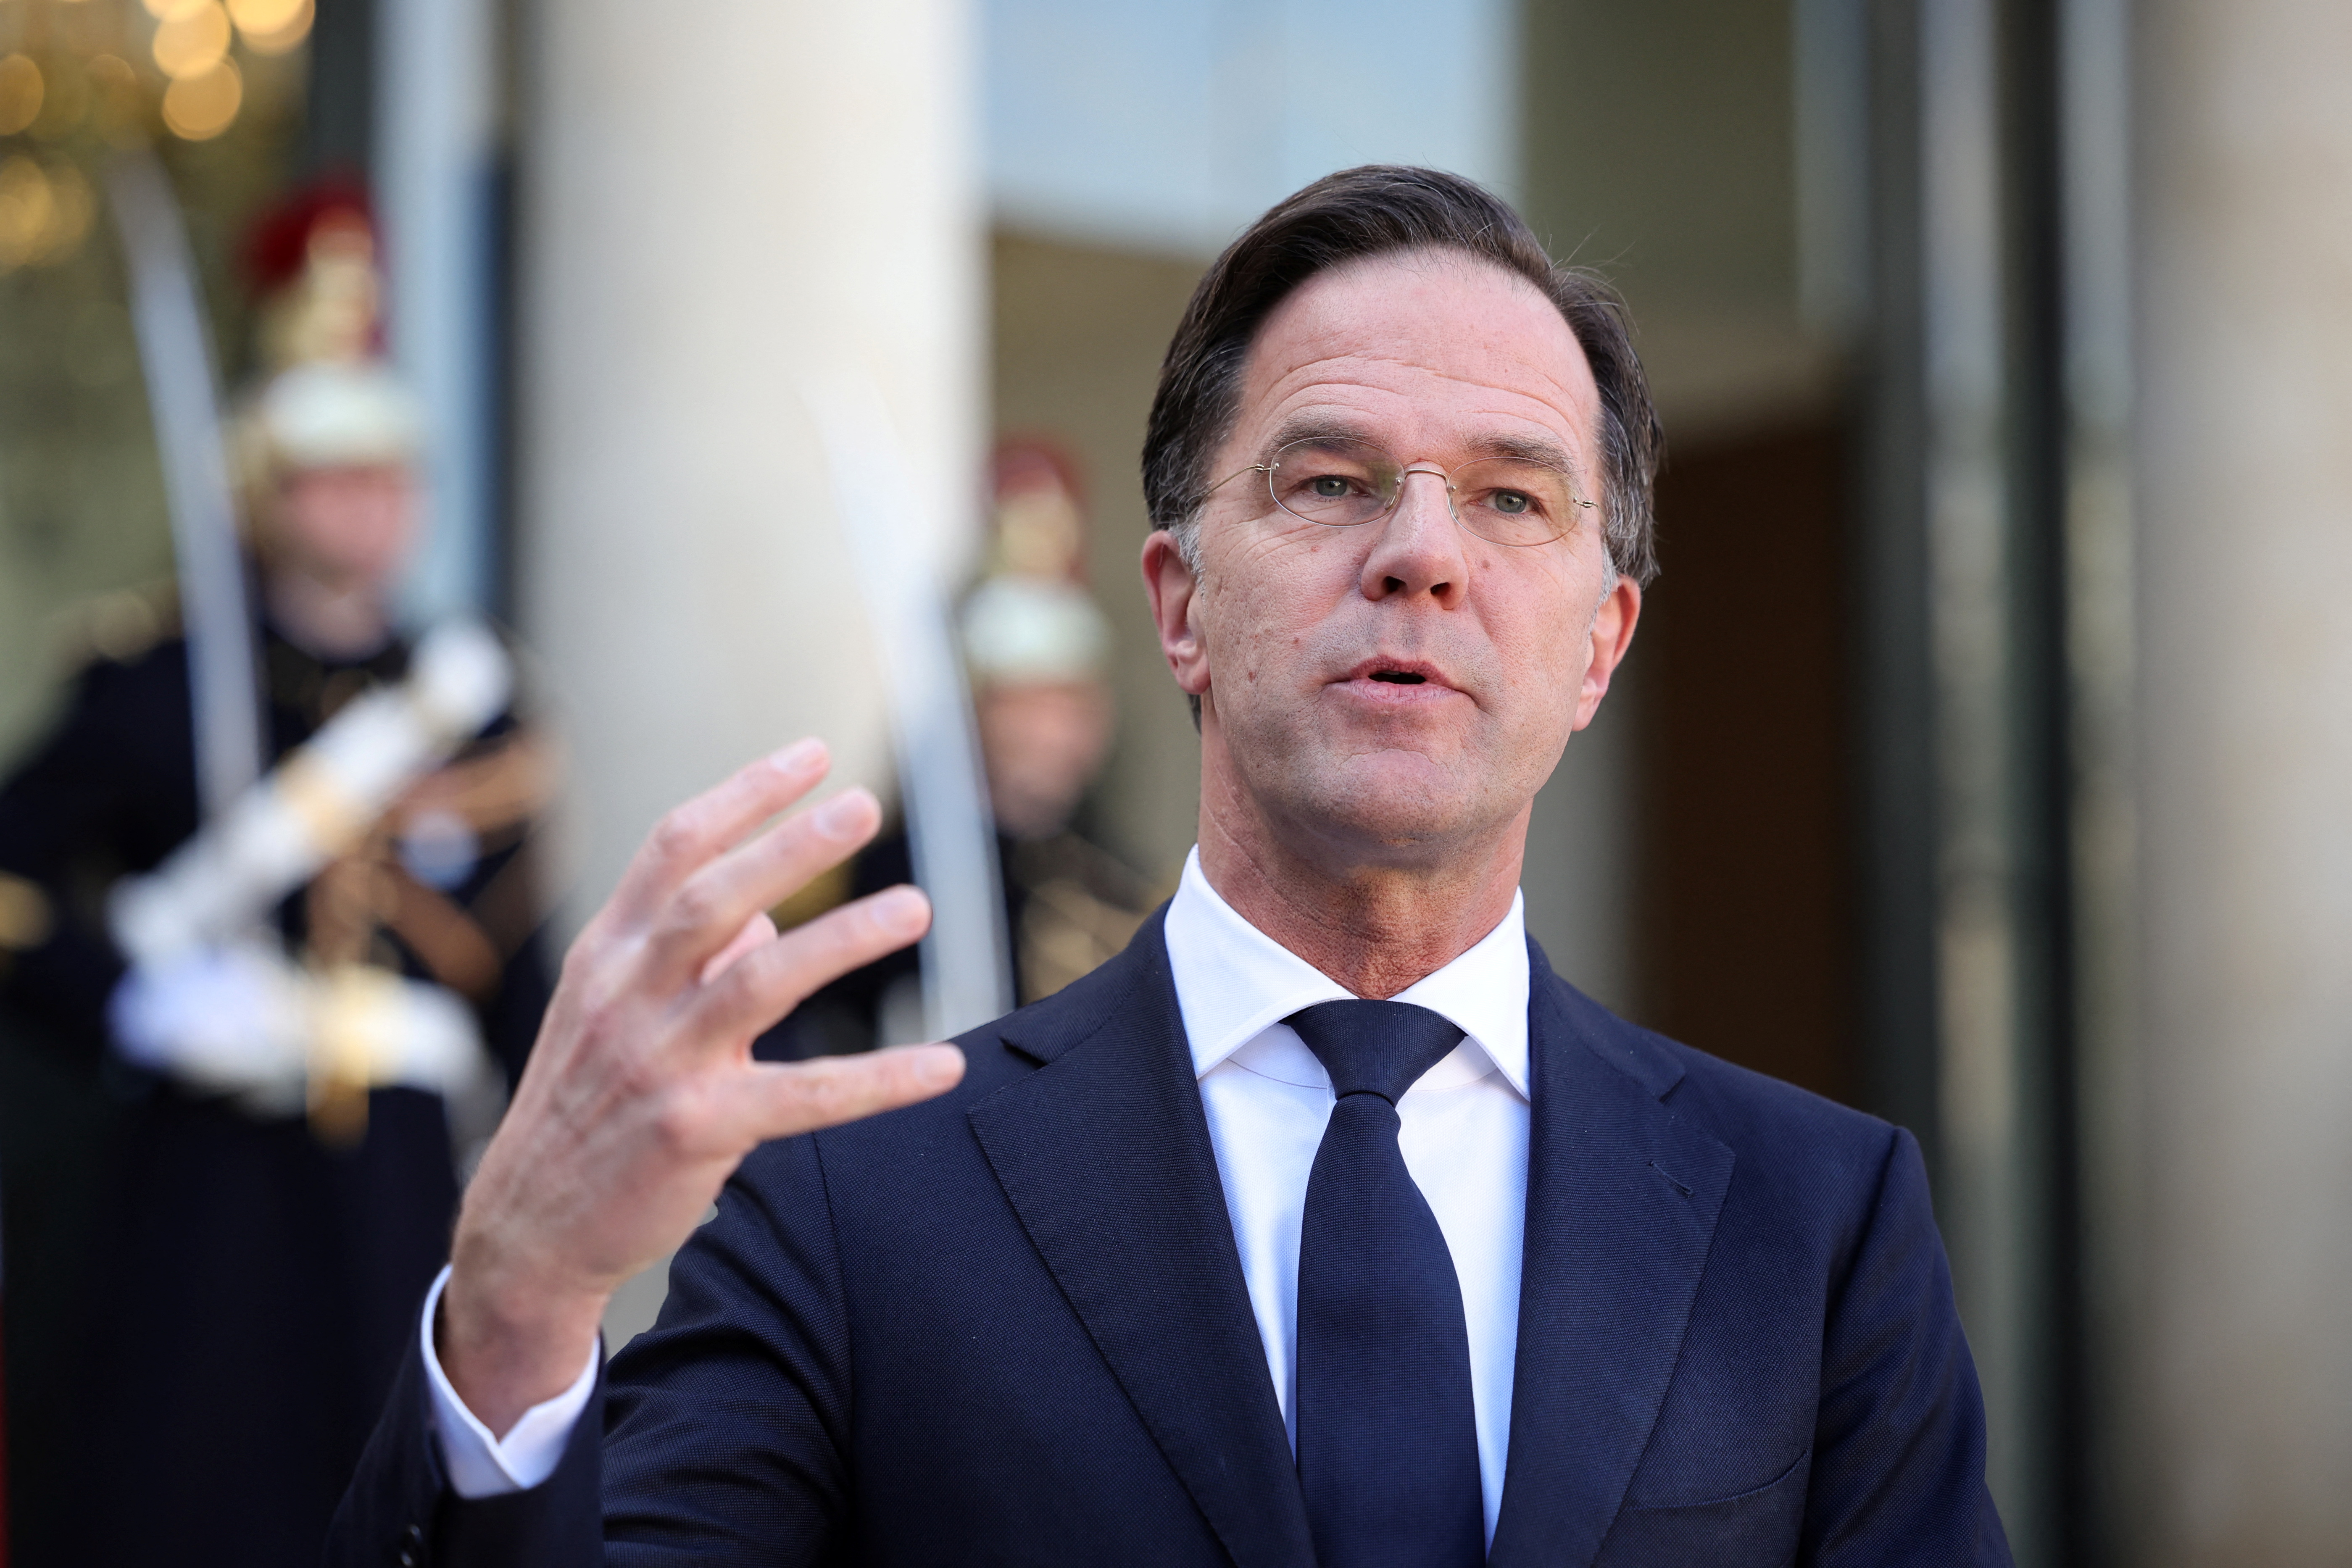 Dutch Prime Minister Mark Rutte delivers a joint statement with French President Emmanuel Macron (not seen) before a meeting at the Elysee Palace in Paris